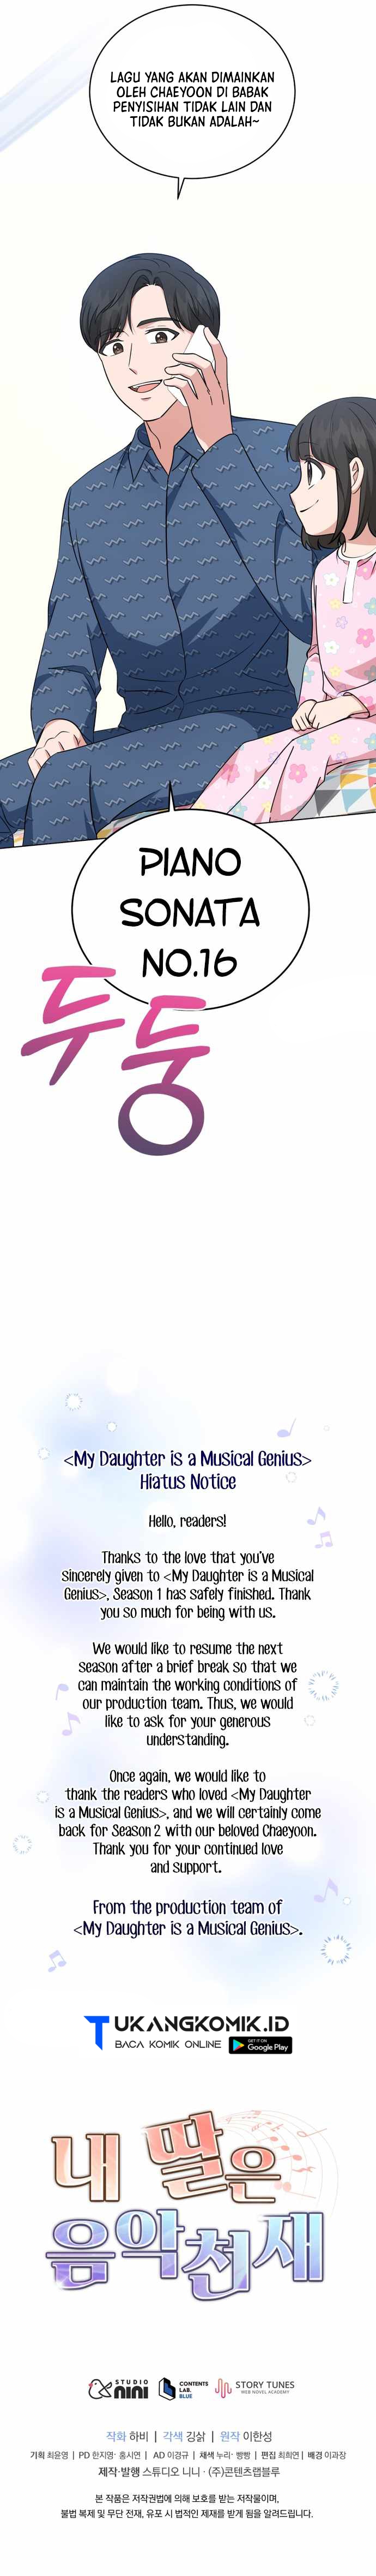 my-daughter-is-music-genius Chapter 60